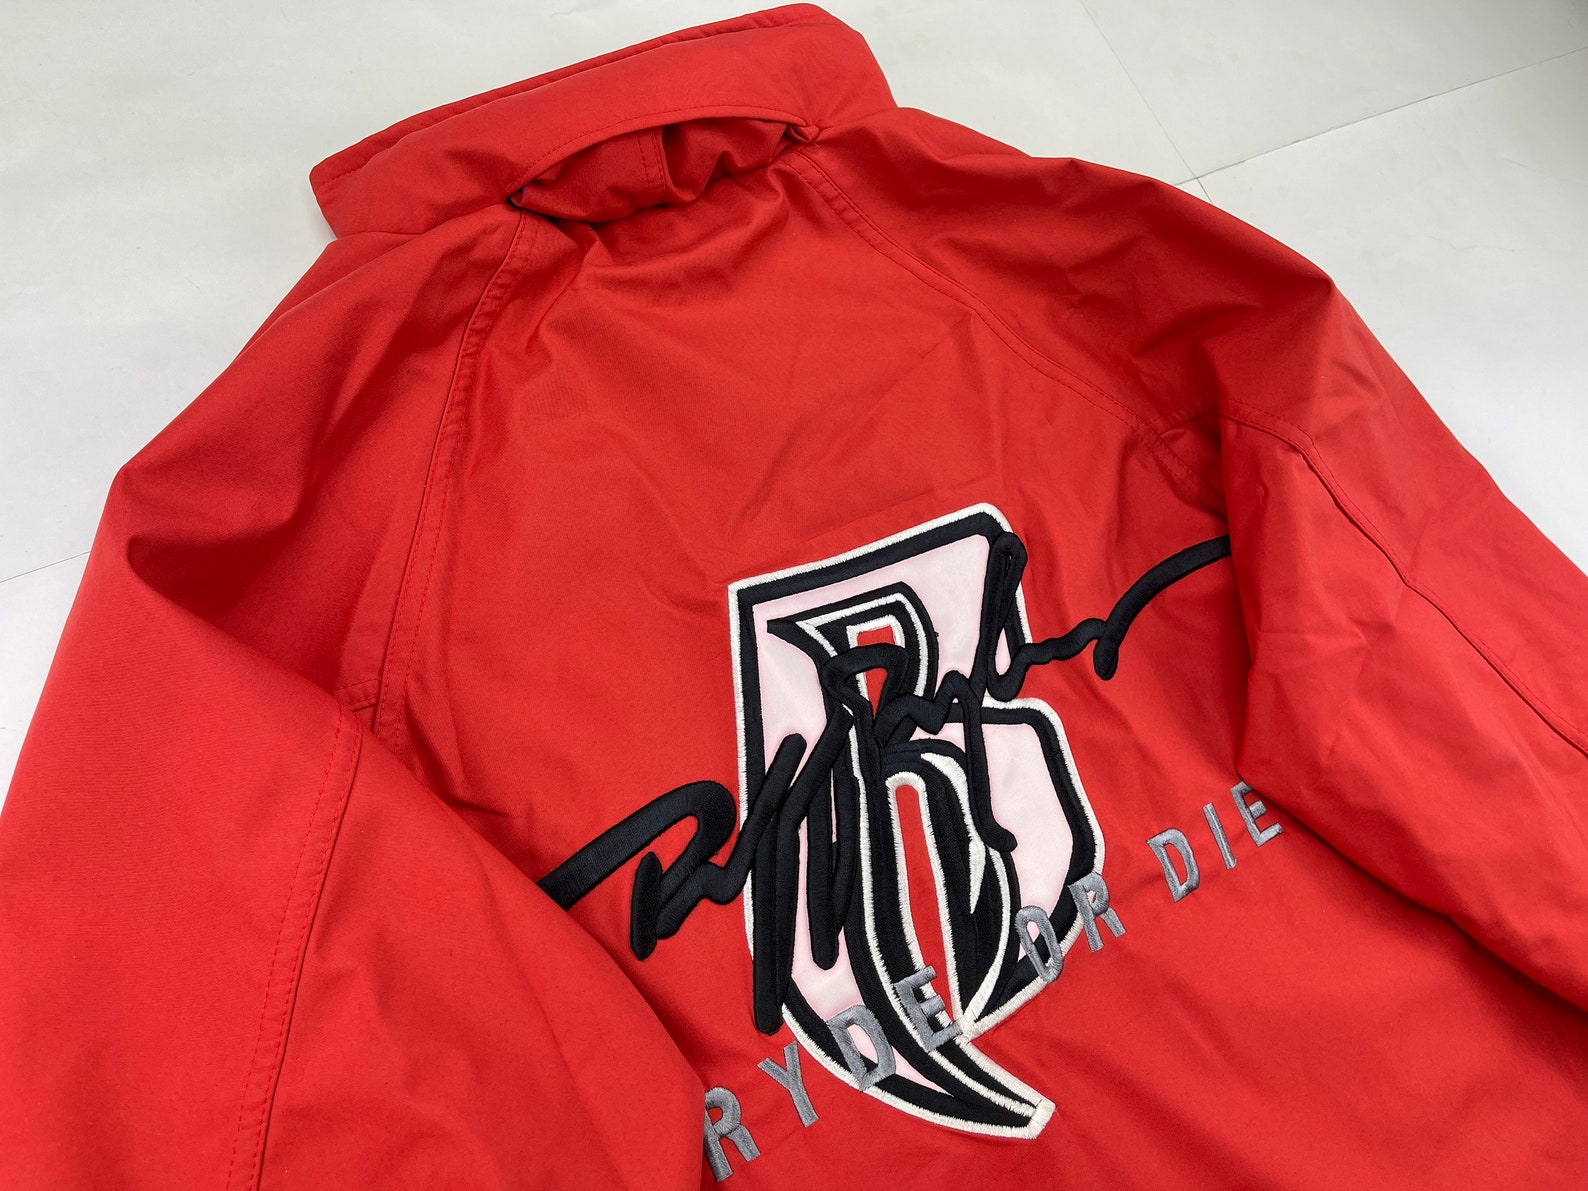 Ruff Ryders Tracksuit Red Vintage Track Suit Jacket Pants - Etsy